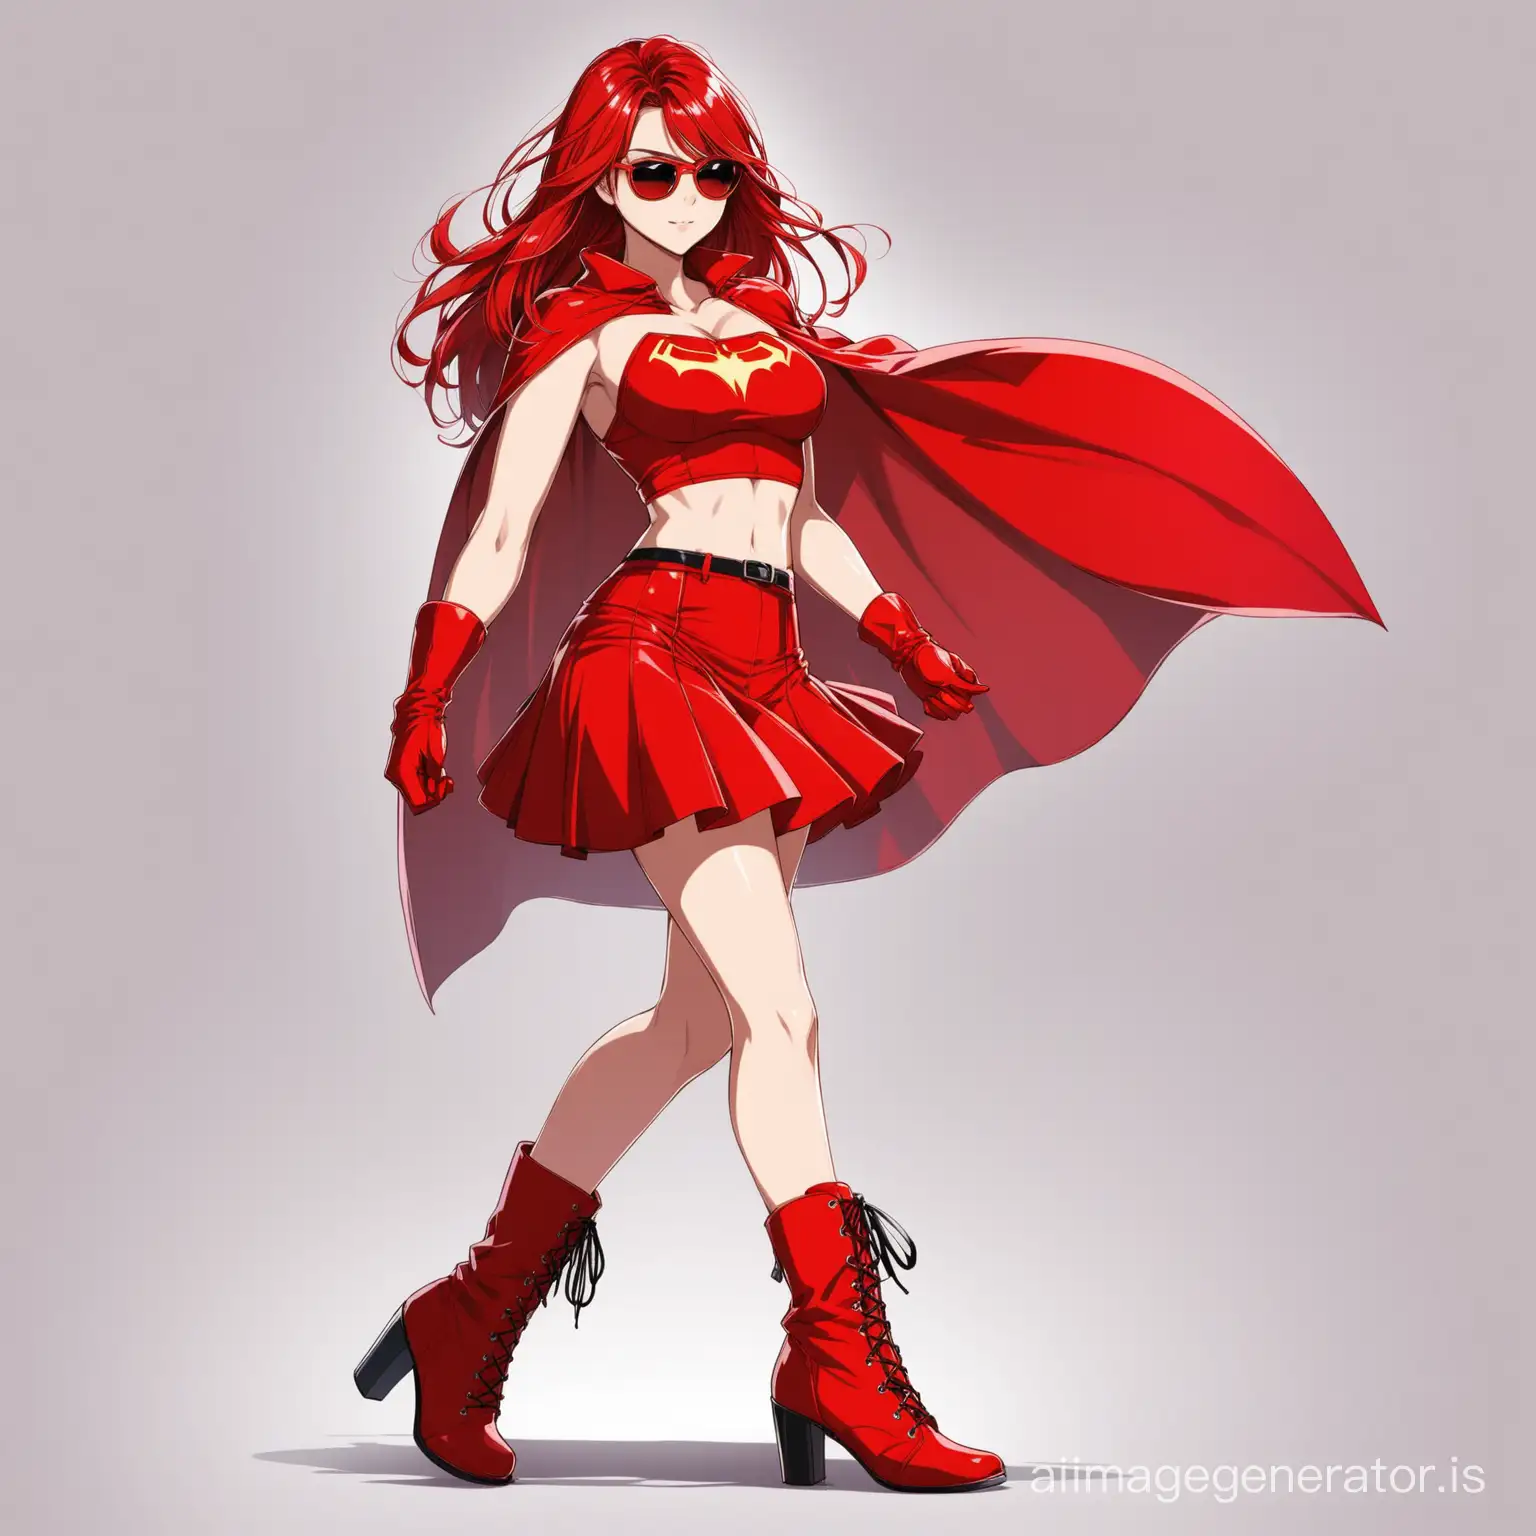 Stylish-Anime-Girl-in-Red-Superhero-Costume-and-Accessories